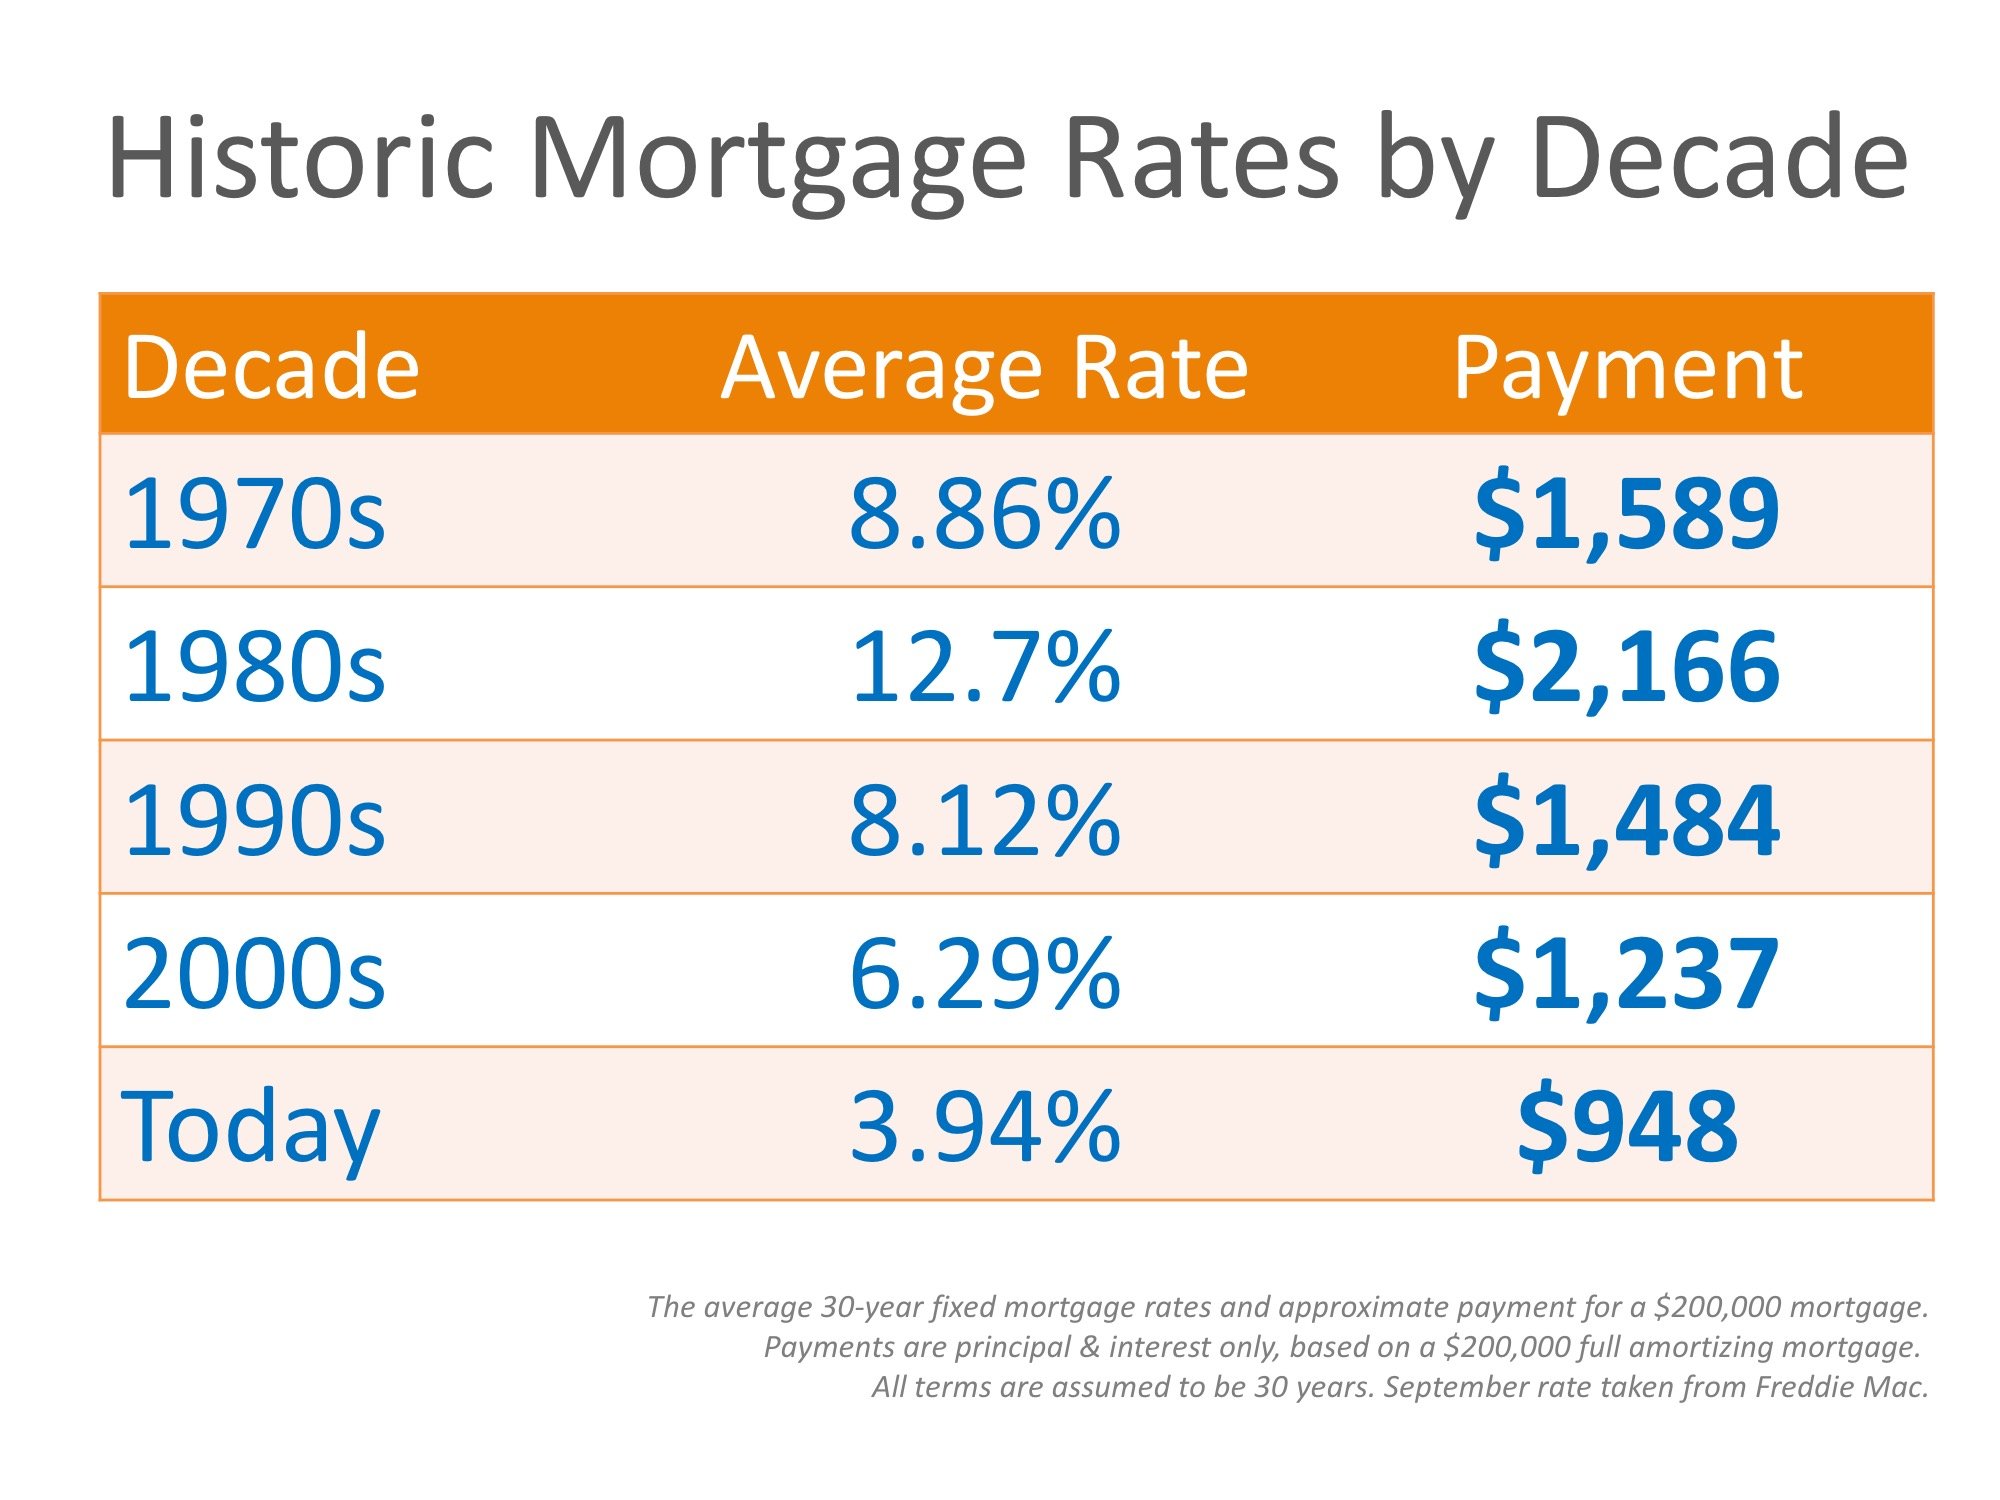 Why Are Mortgage Interest Rates Increasing?